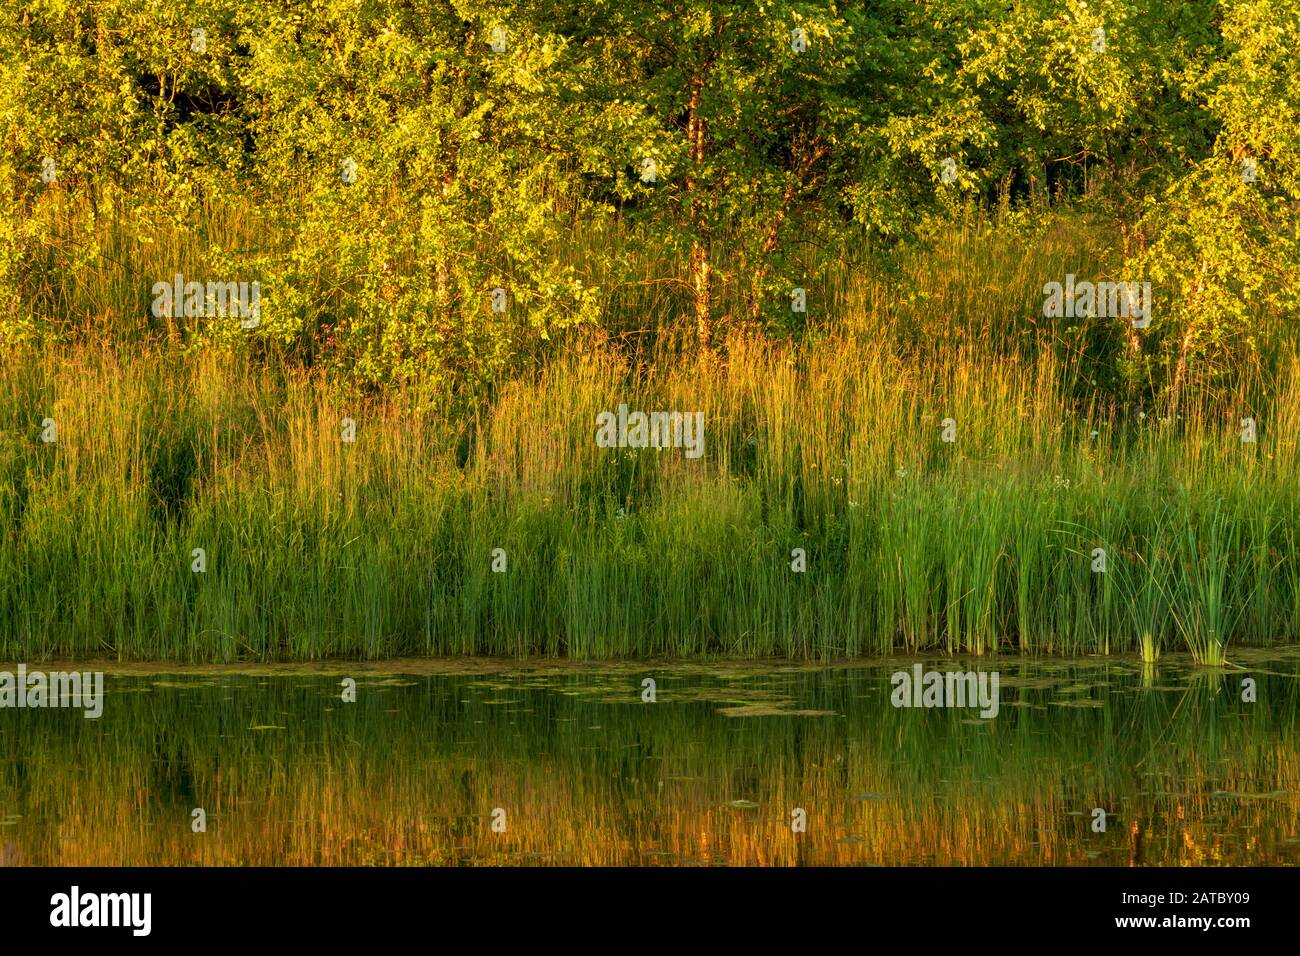 Sunset Reflection of Cattails in Pond at Elm Grove Village Park Stock Photo